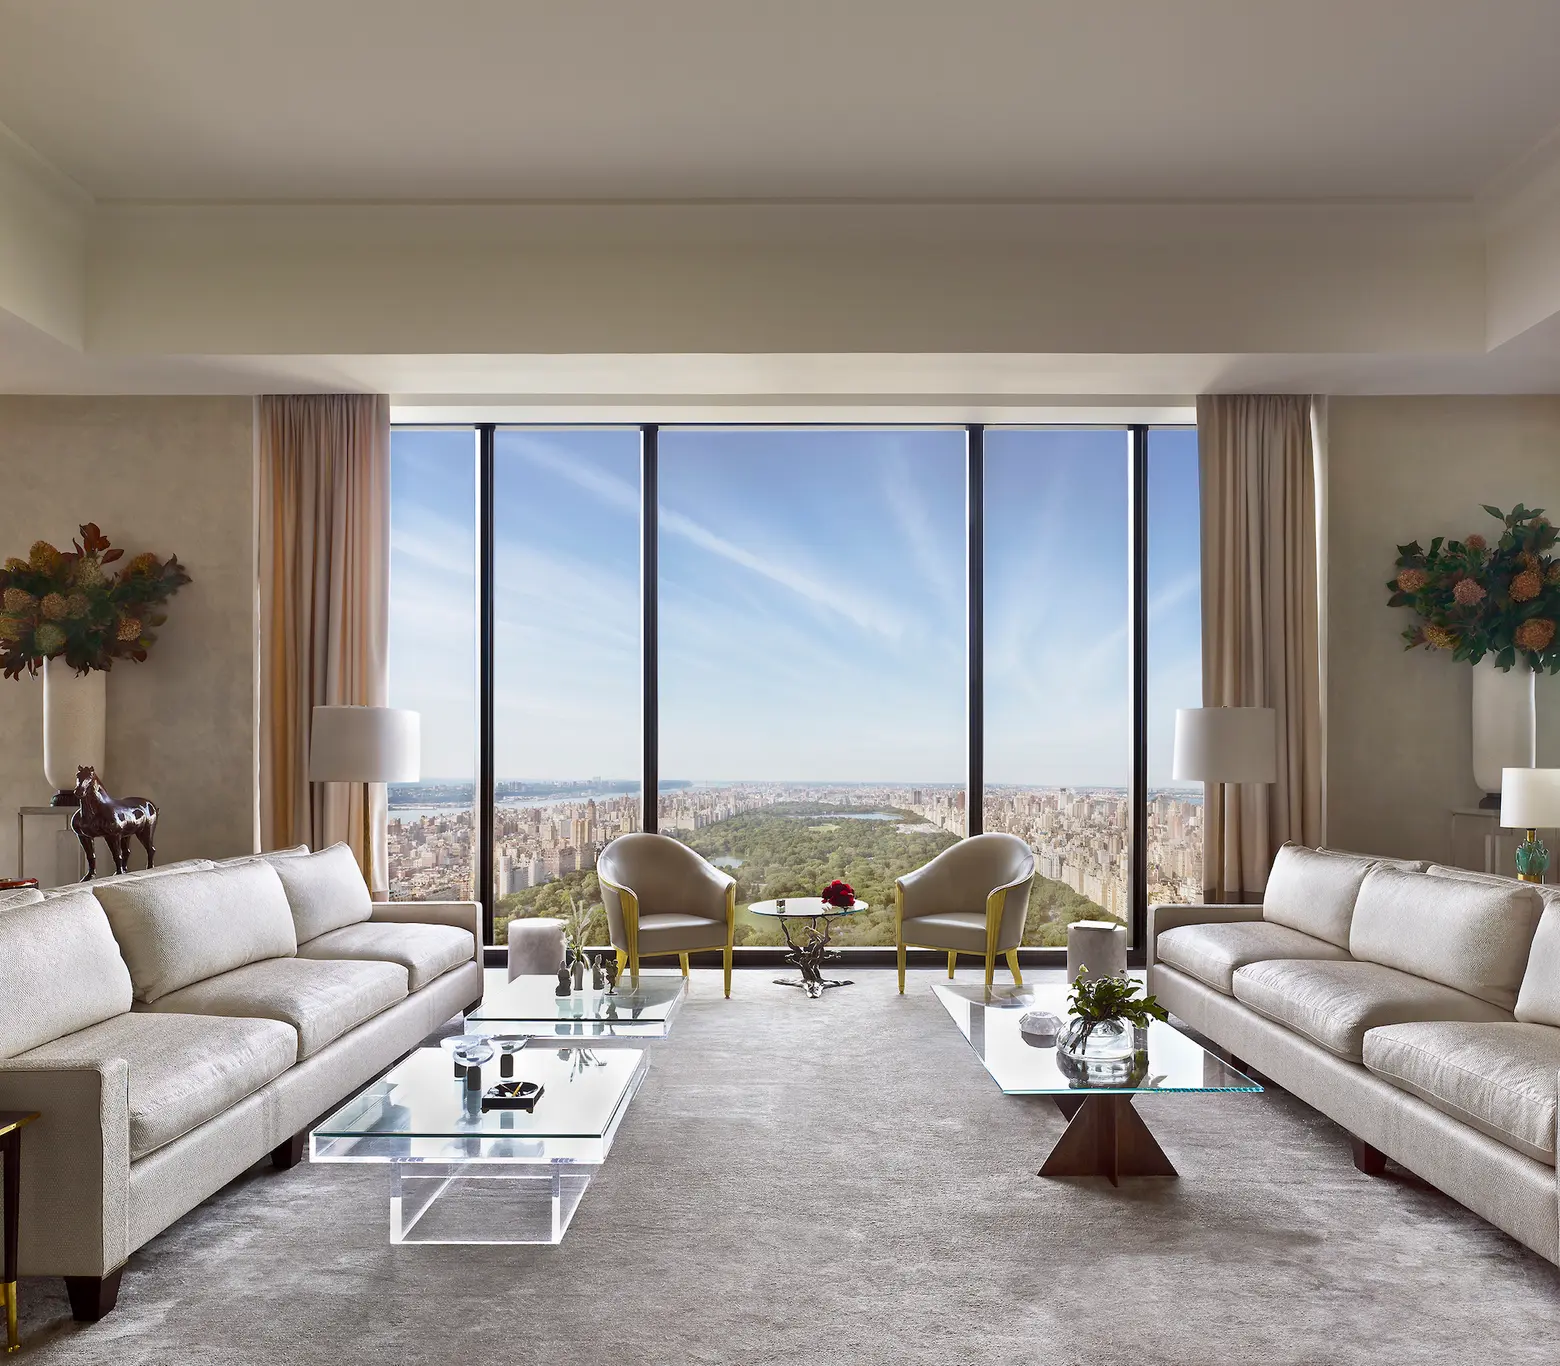 $57M penthouse at 111 West 57th Street joins list of NYC’s priciest pandemic sales